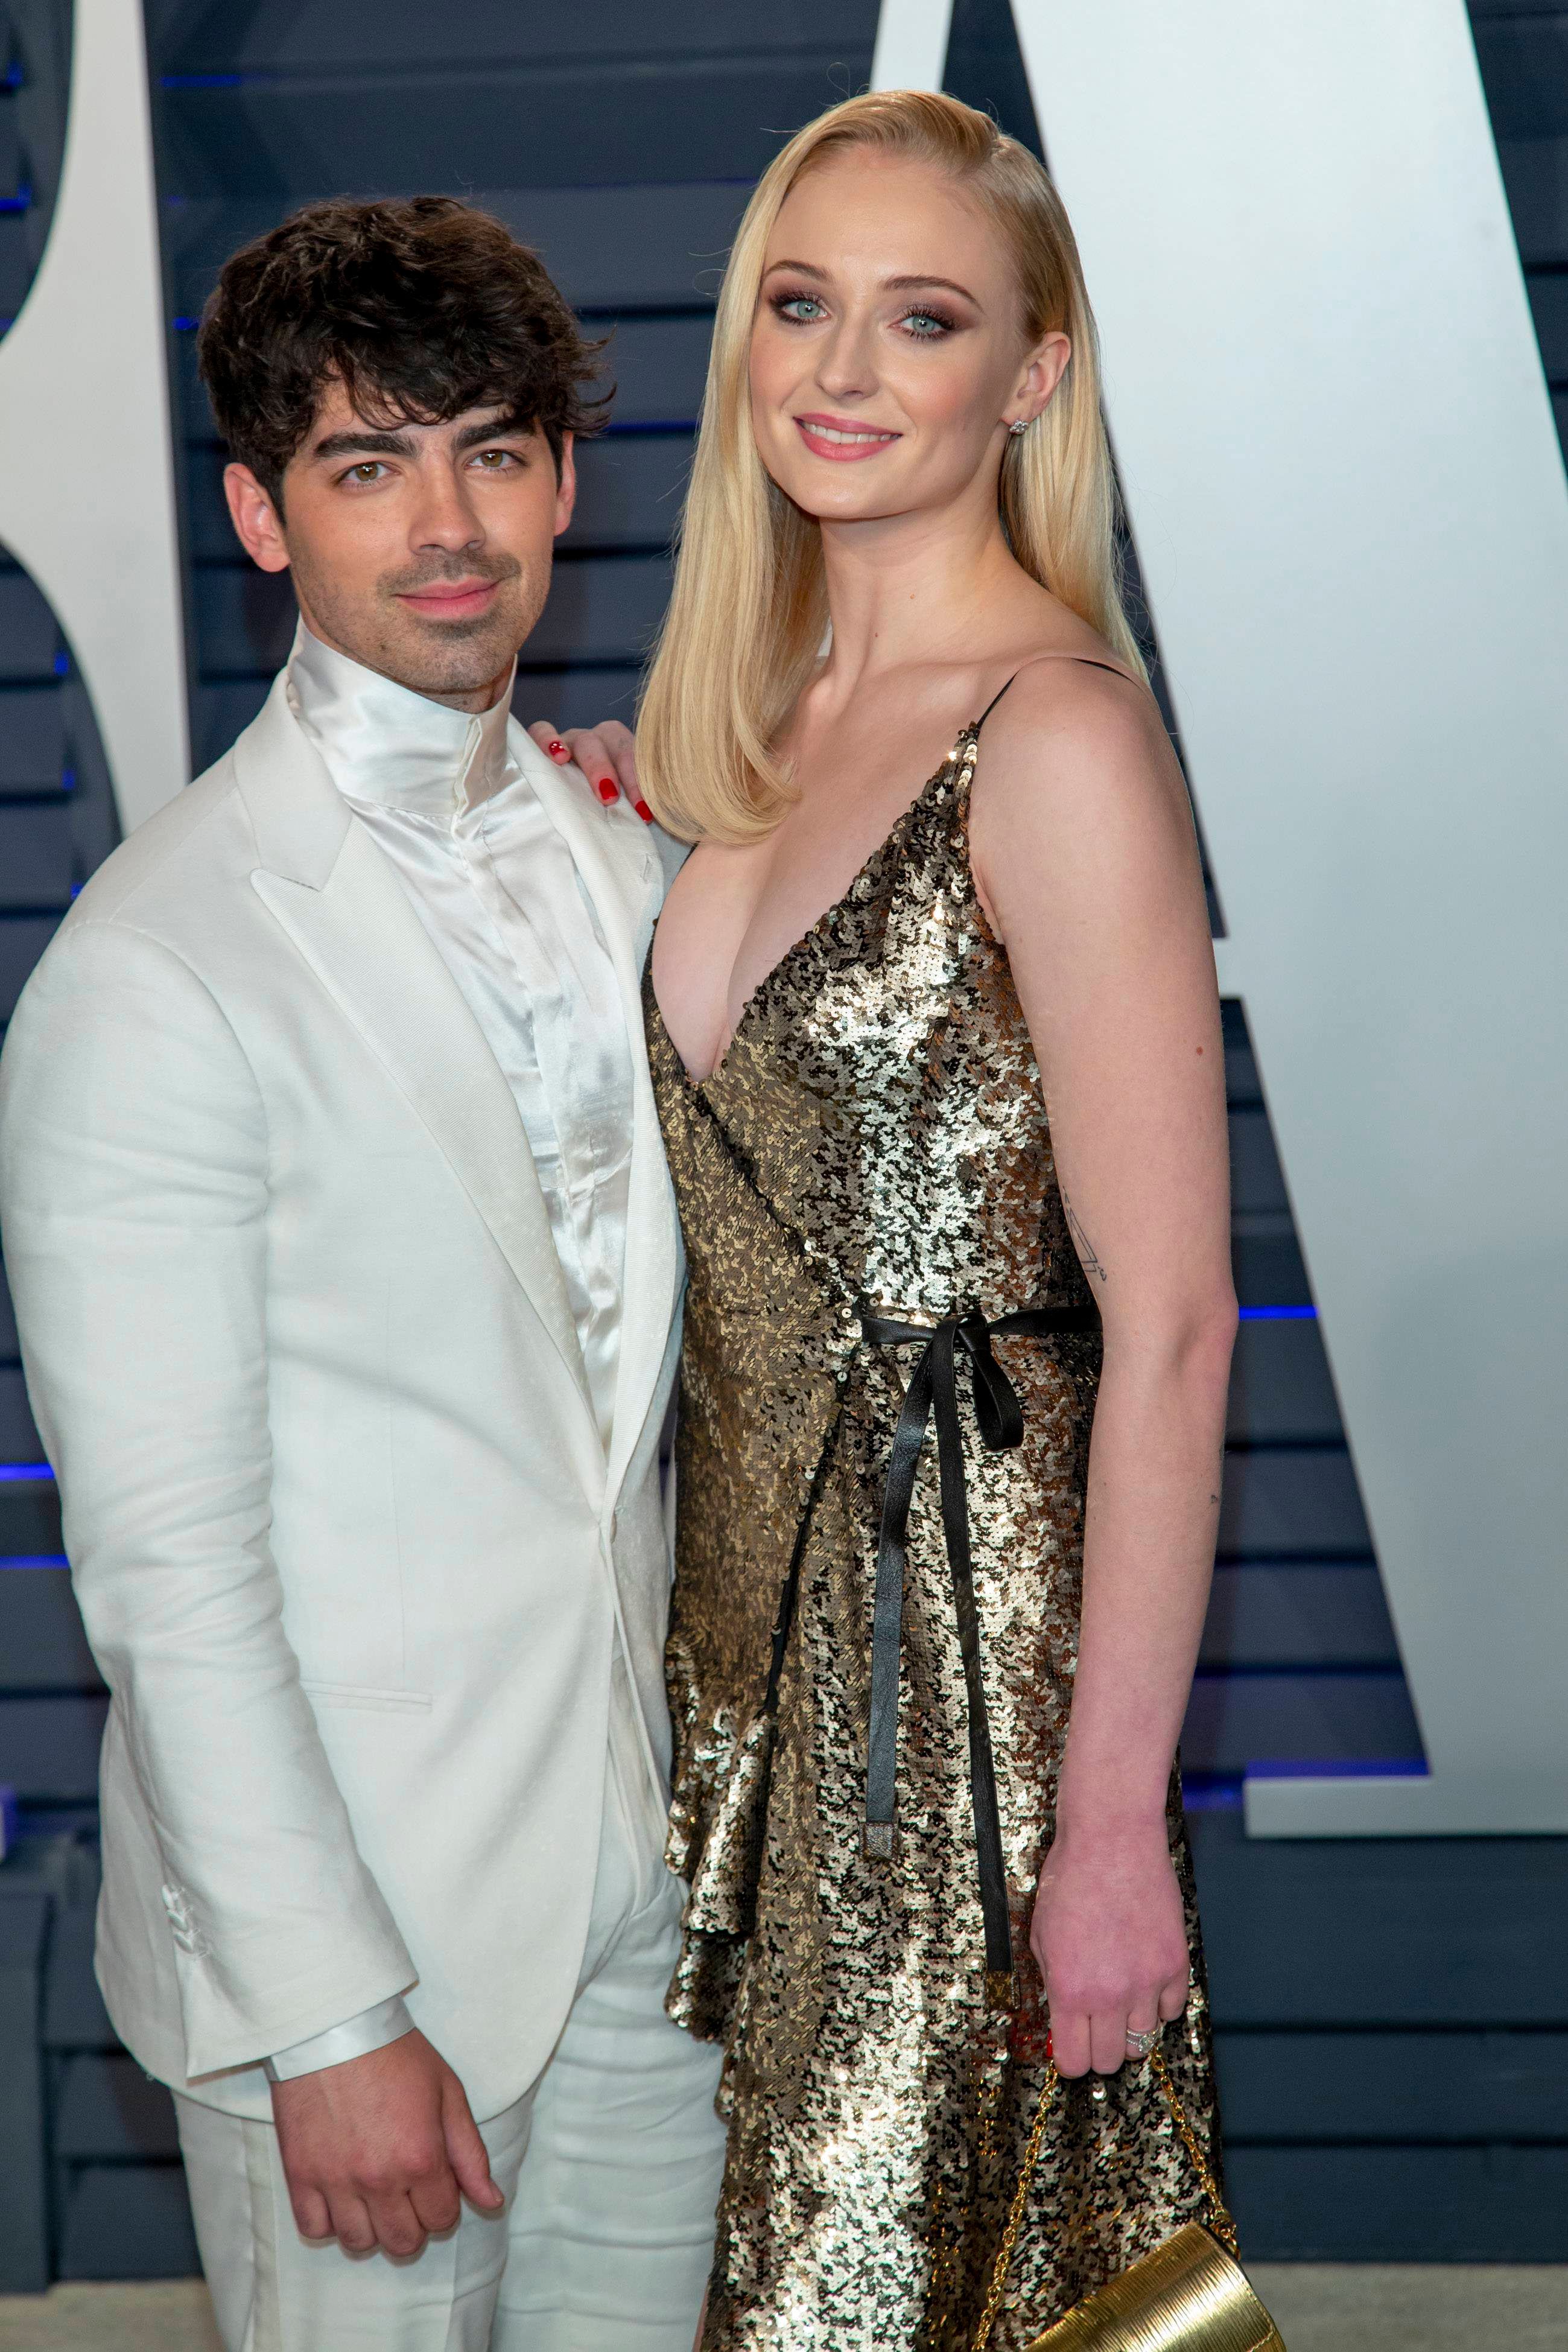 Things You Might Not Know About Joe Jonas And Sophie Turner's